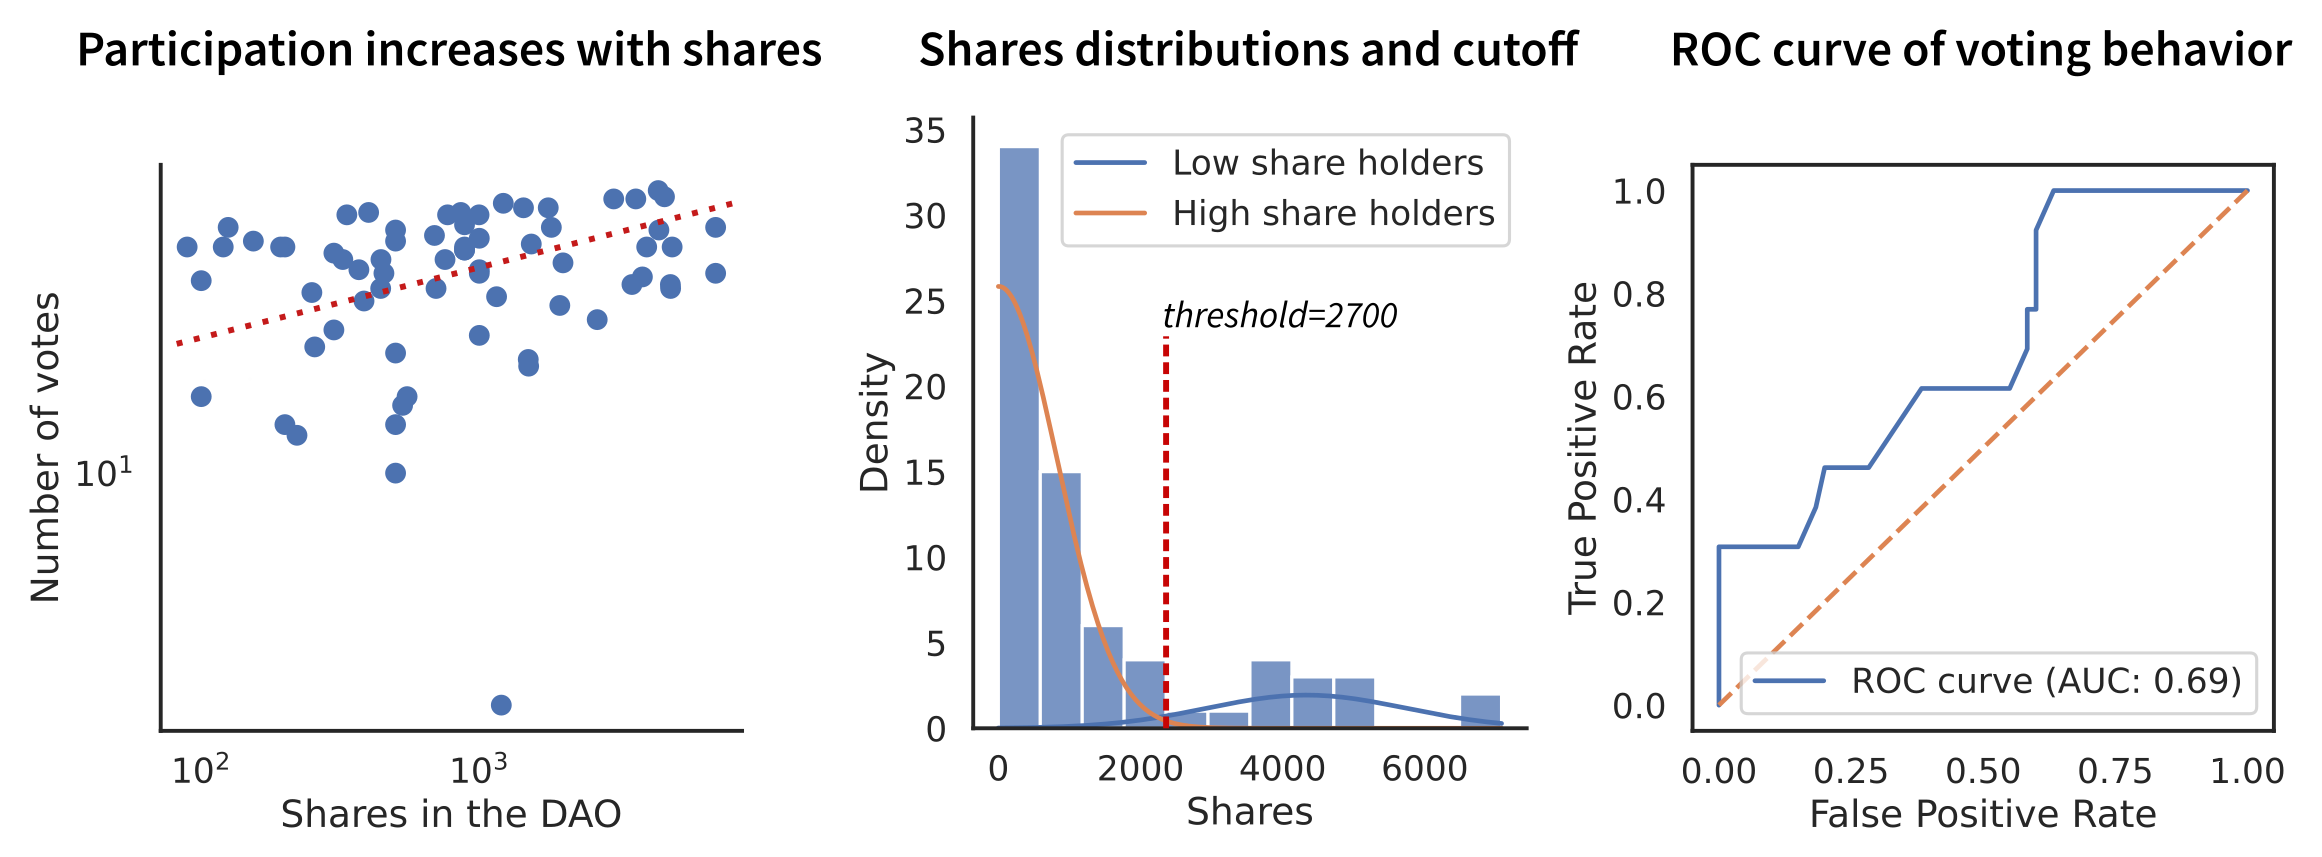 Analysis of the shares as a factor in participation. Left, log-log plot of the participation rate as a function of the number of shares. Middle, distribution of shares cutoff in two groups, high shareholder and low shareholders. A Gaussian Mixture Model was applied to the data to fit both distributions, and the threshold was set at the crossing point between both distributions. Right, ROC curve analysis of to observe the correlation between being a high shareholder and the propensity to vote more, the Area Under the Curve (AUC) is of 0.69.